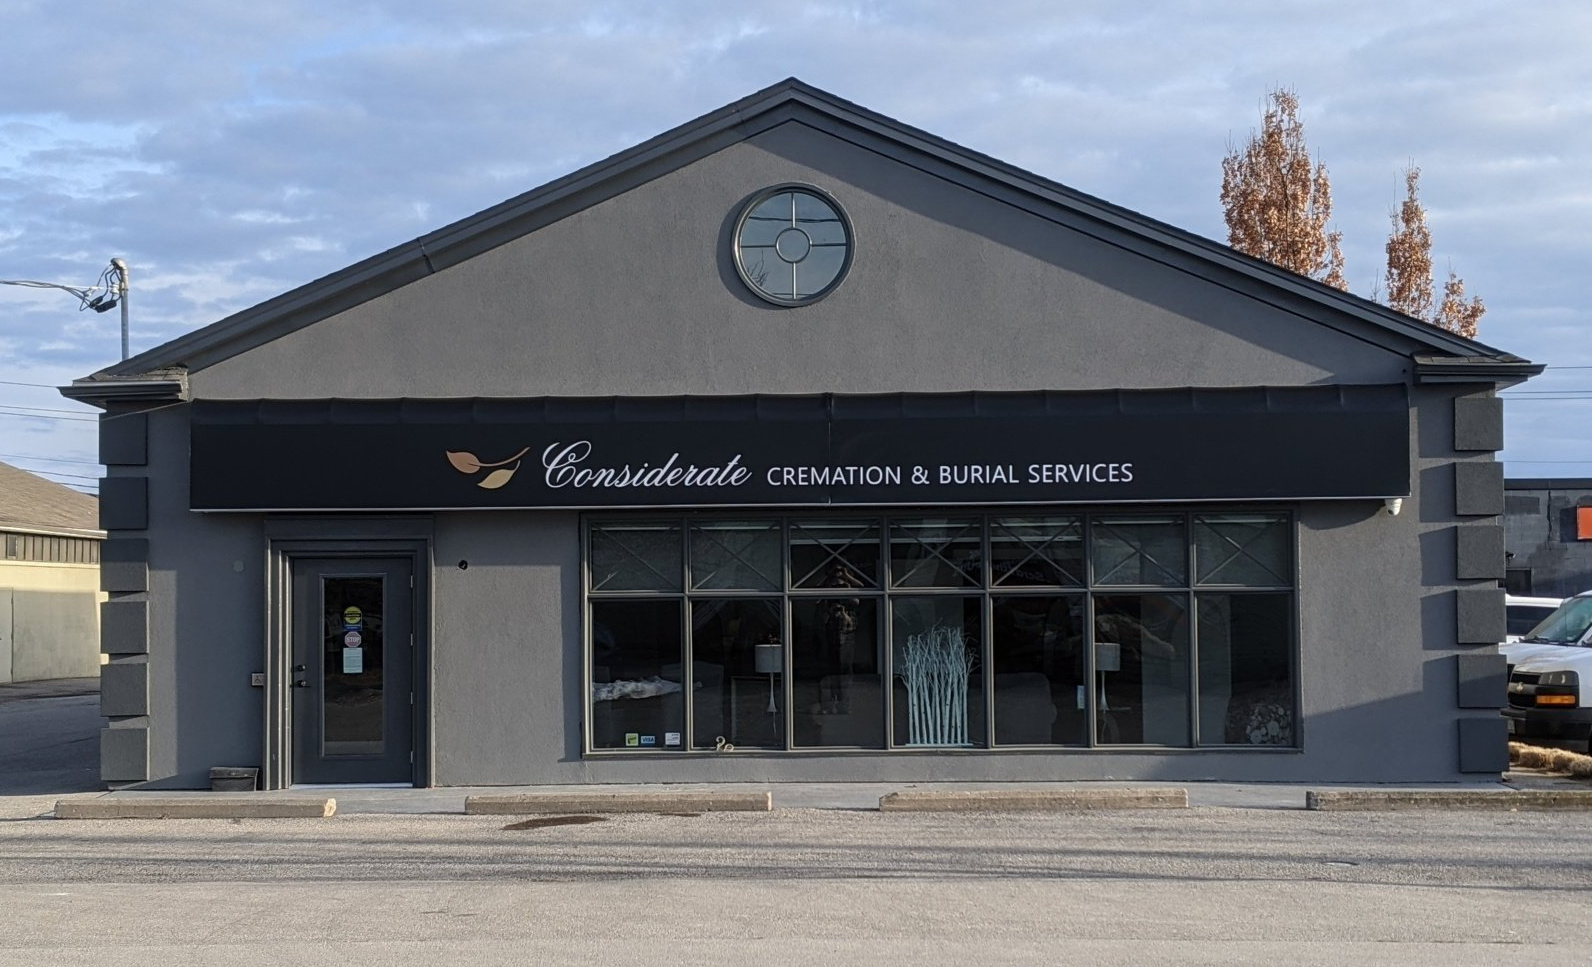 Considerate Cremation & Burial Services - St. Catharines funeral home facilities.